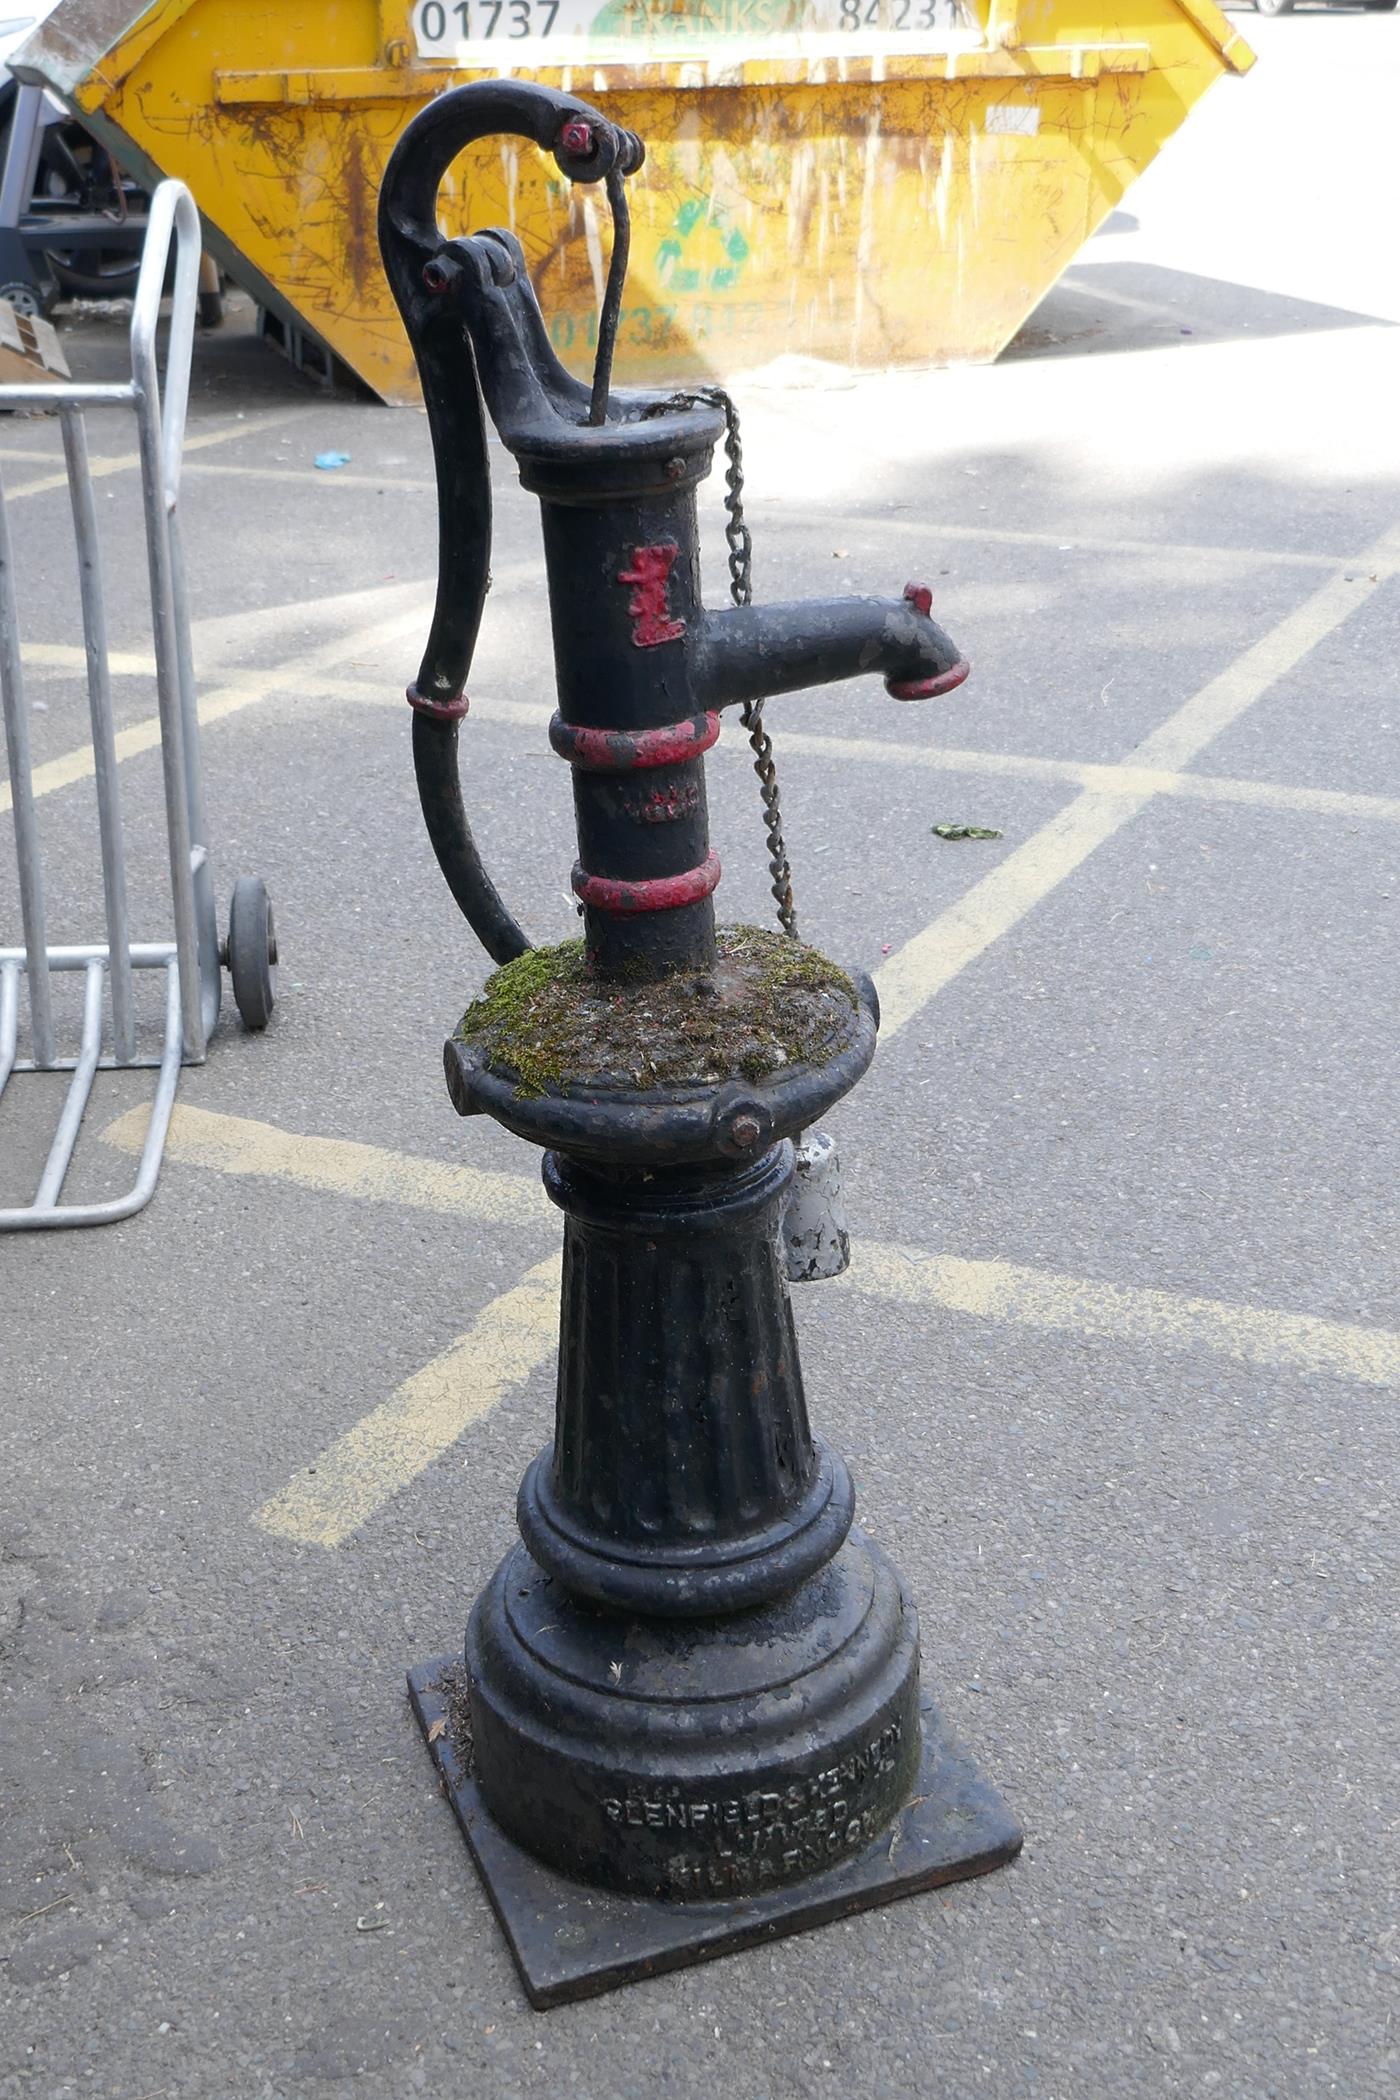 A late Victorian cast iron water pump with attached drinking cup, made by Glenfield & Kennedy, - Image 2 of 5